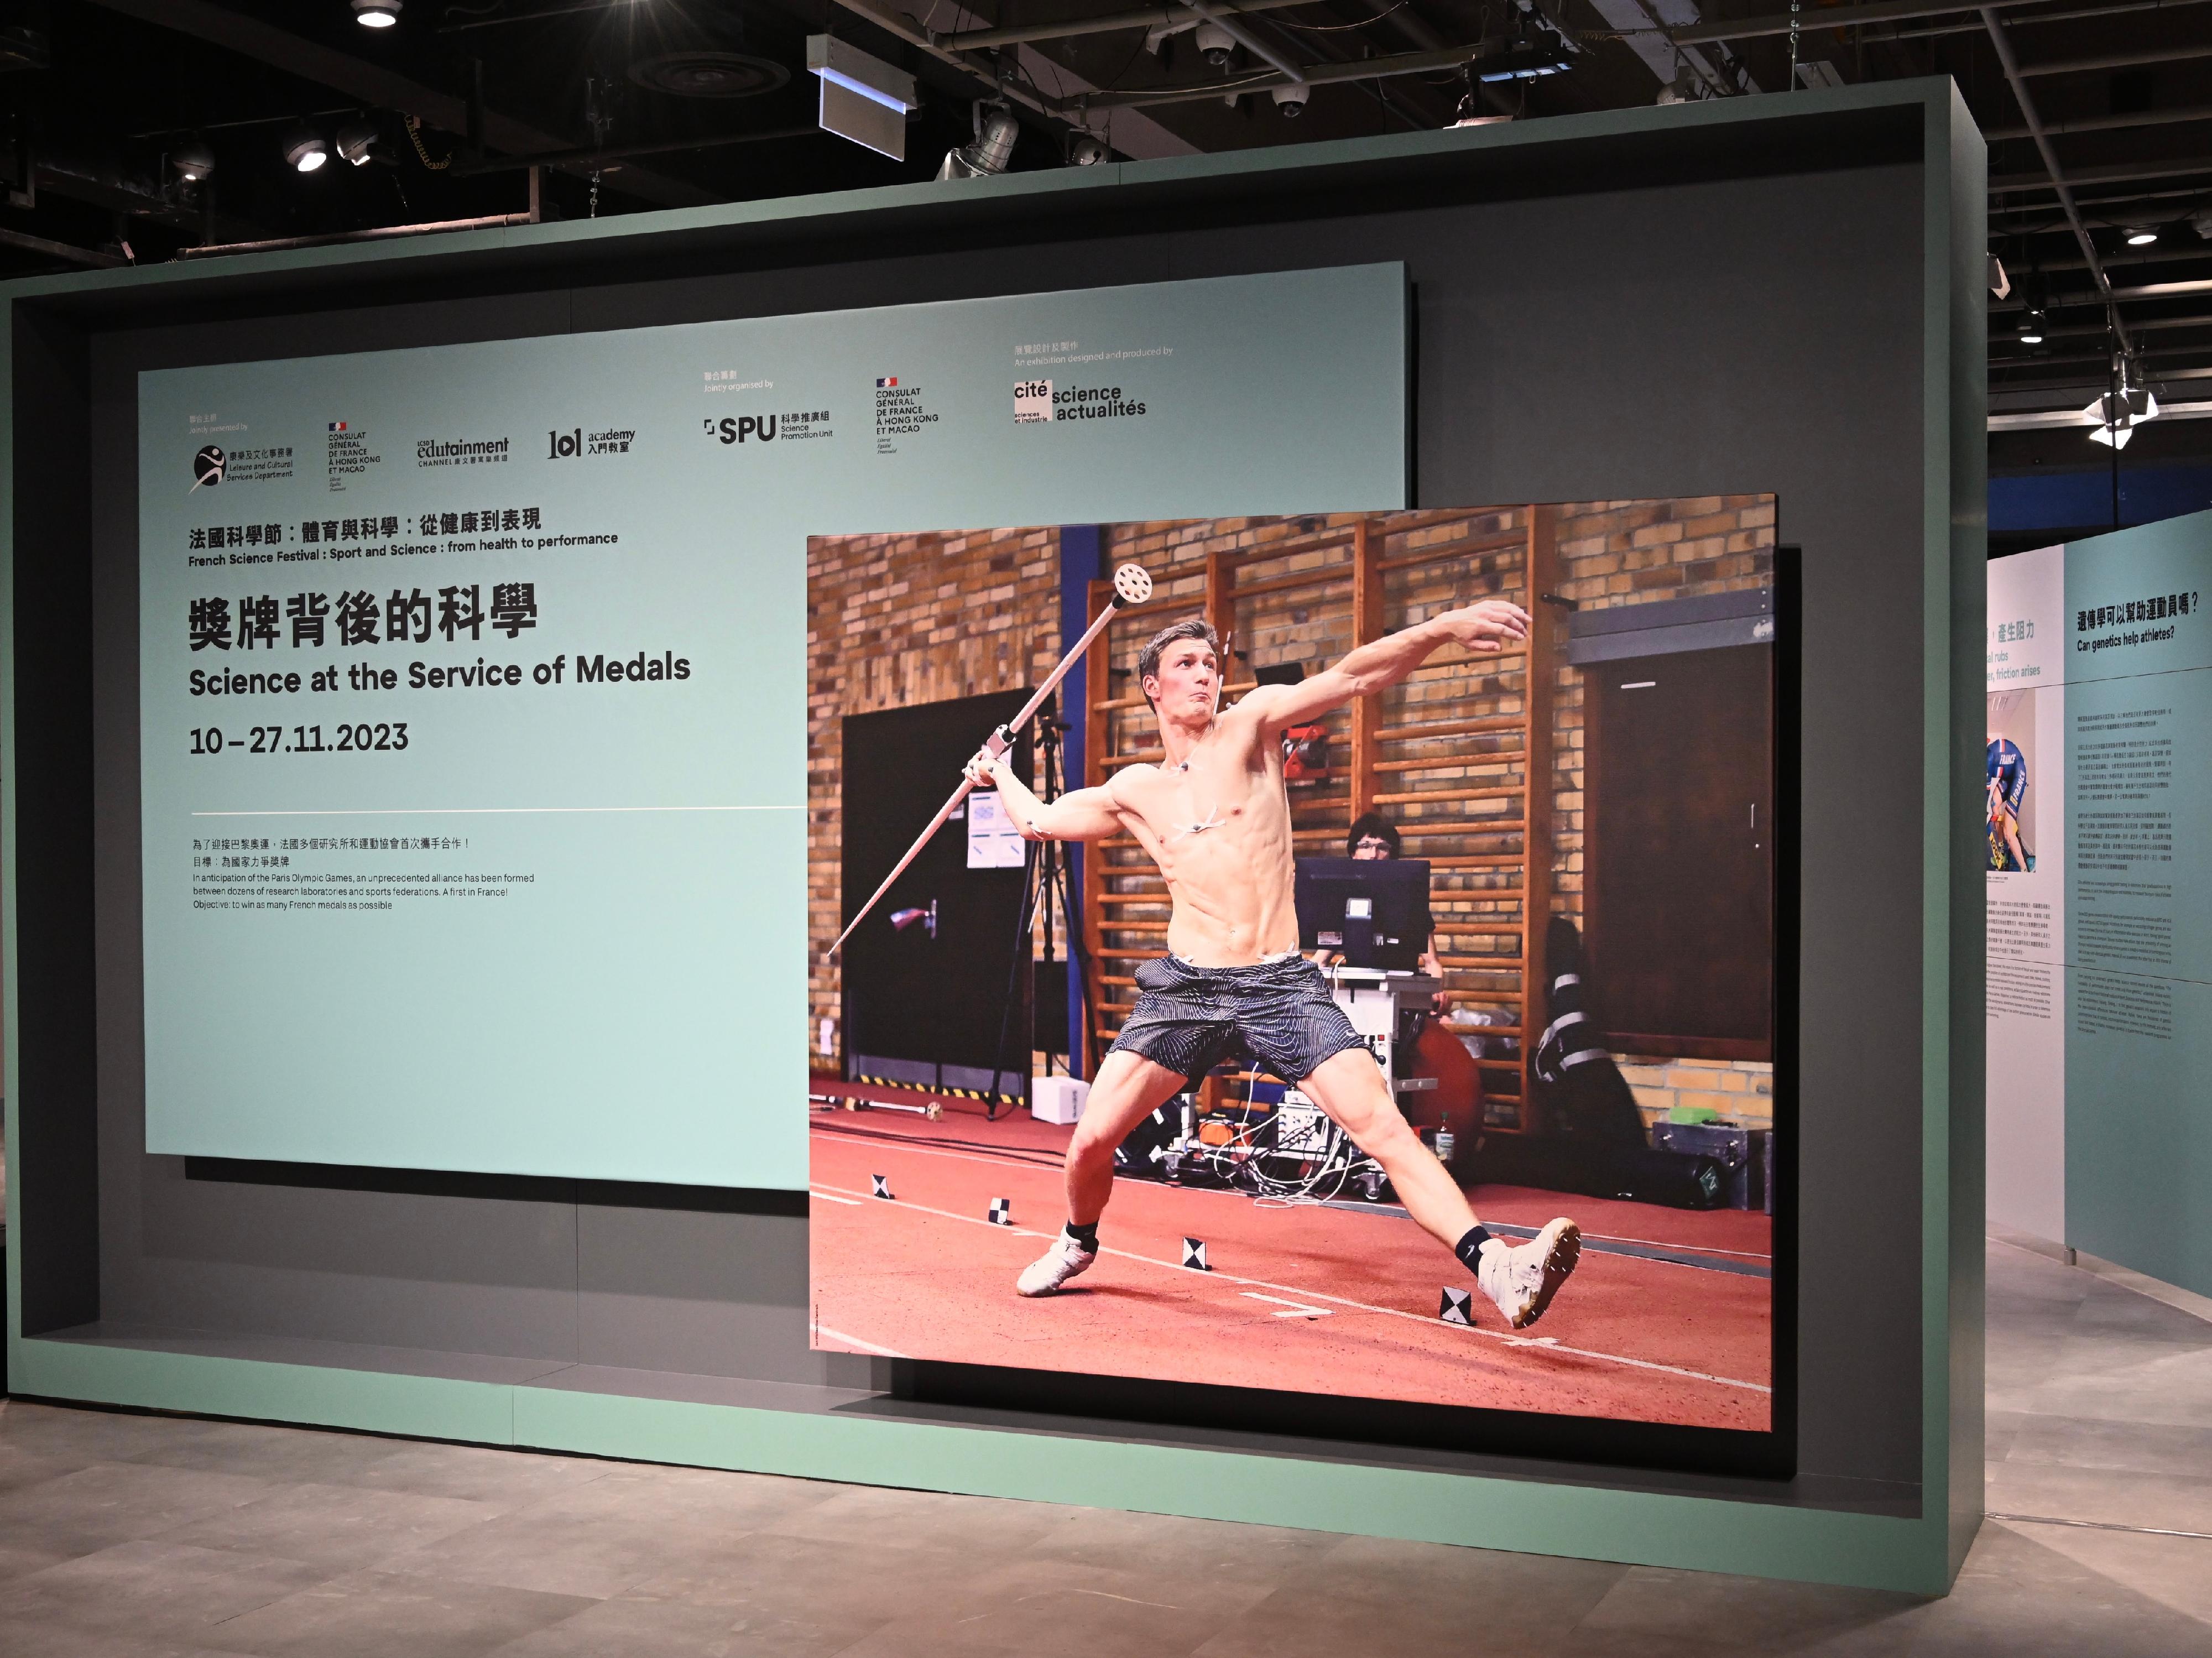 The French Science Festival "Science at the Service of Medals" exhibition, designed by the Cité des sciences et de l'industrie, will be held at the Hong Kong Science Museum from tomorrow (November 10) to November 27. Members of the public can better understand the relationship between science and health as well as athletes' performances through the exhibition.
